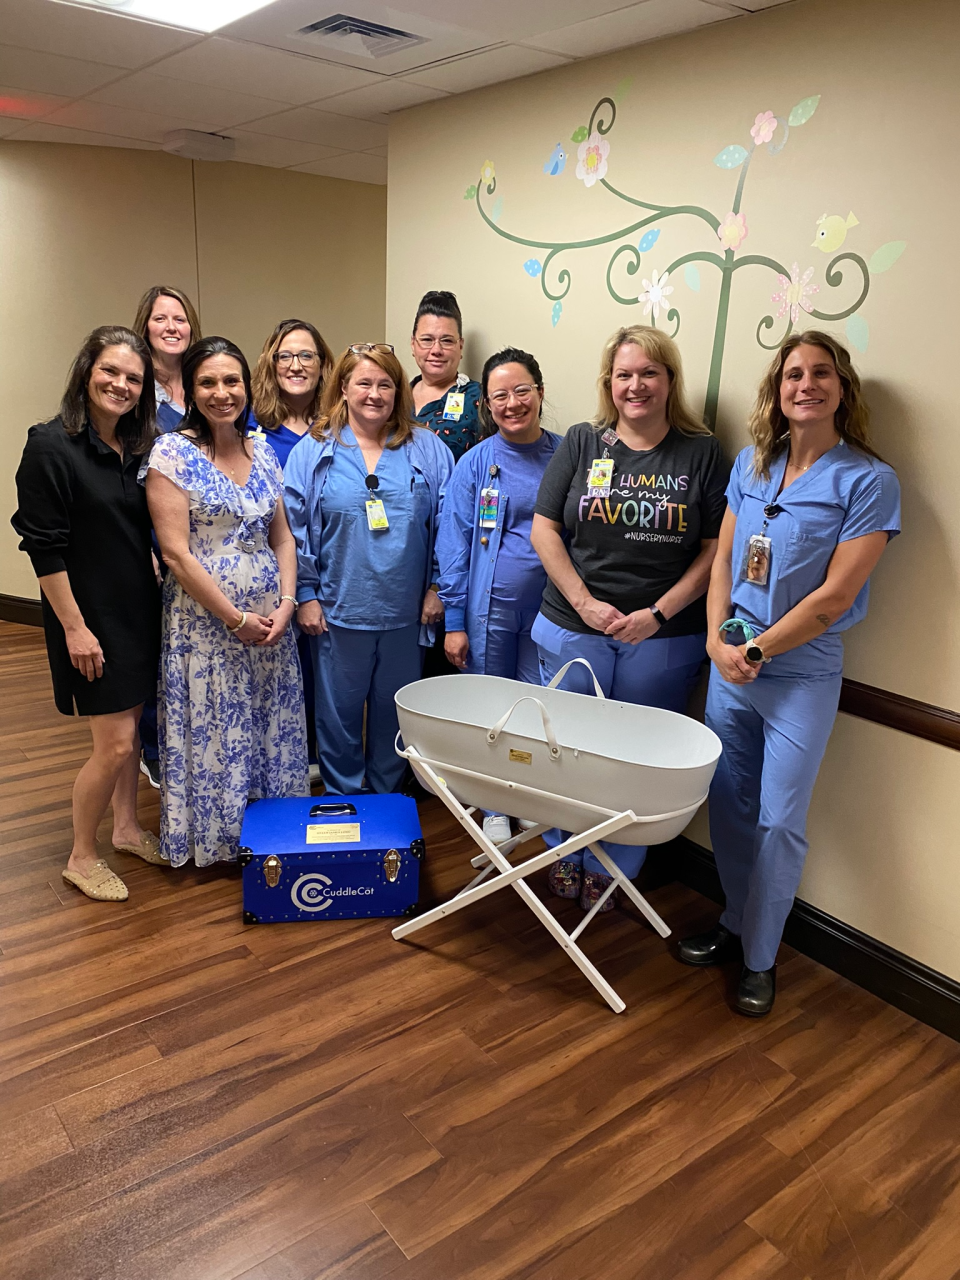 A Cuddle Cot and grief library were gifted to the acute care facility in Gallatin, allowing families more time with their baby.